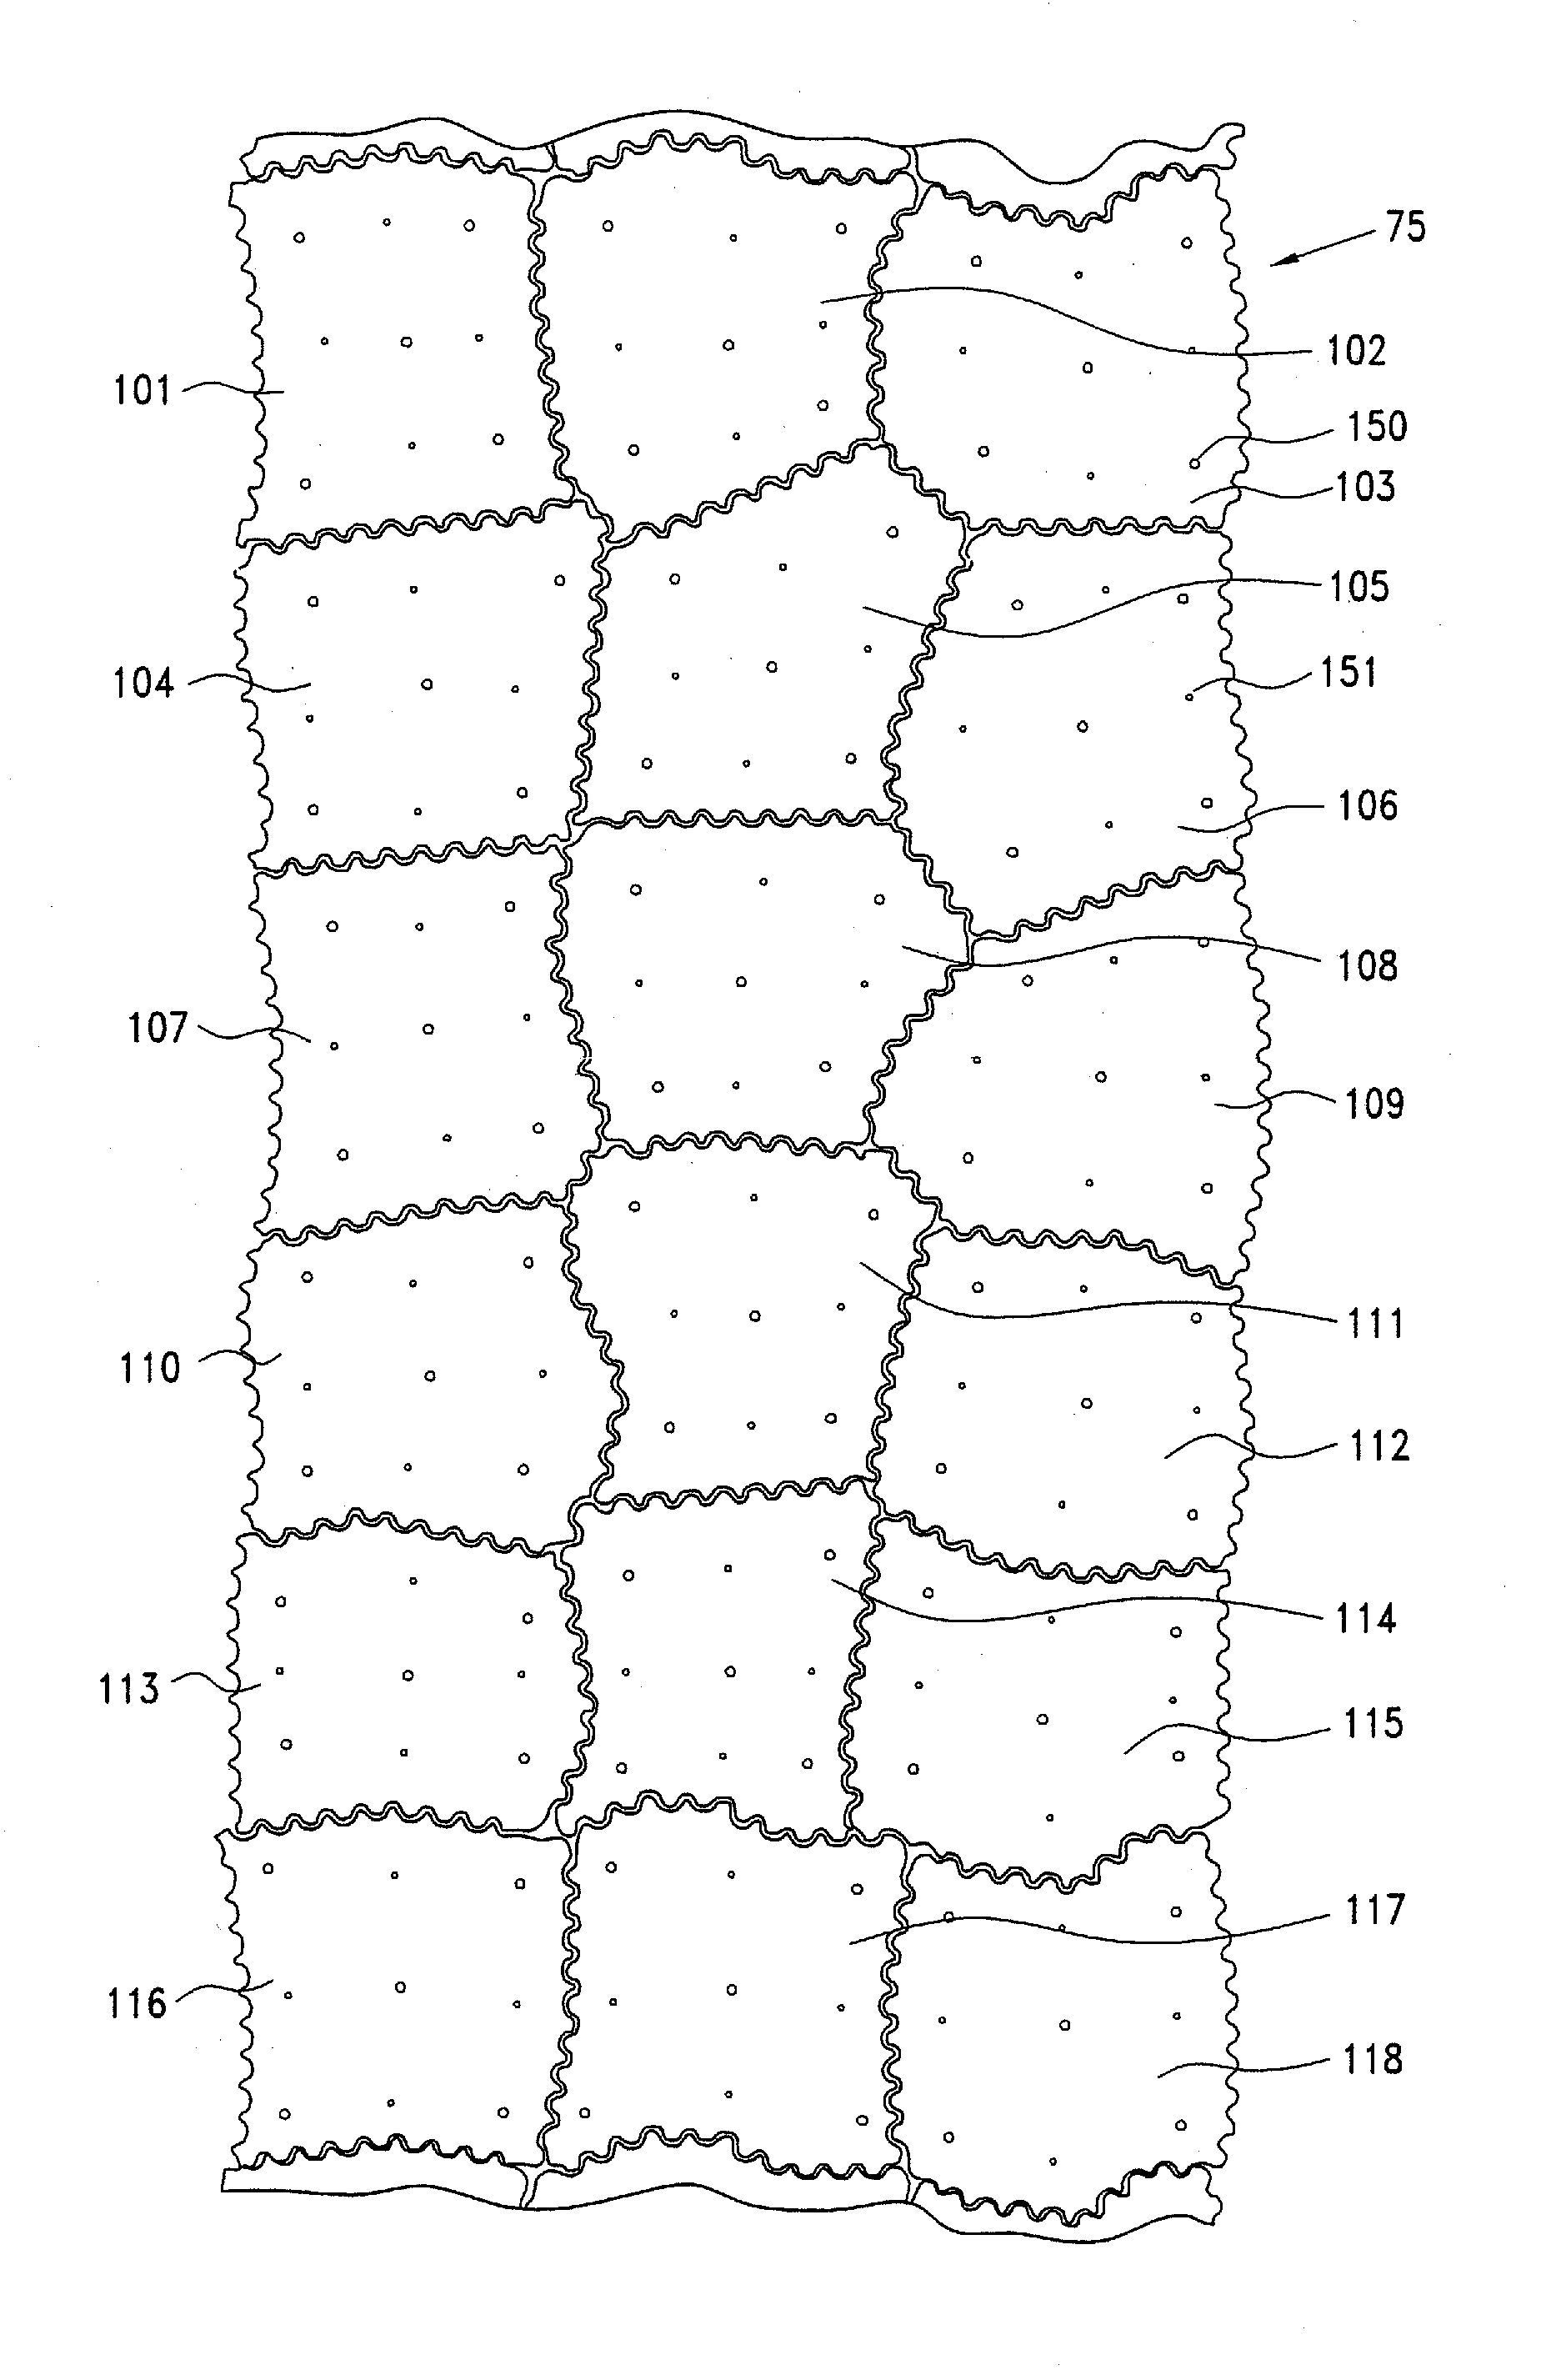 Production of thin, irregular chips with scalloped edges and surface bubbles